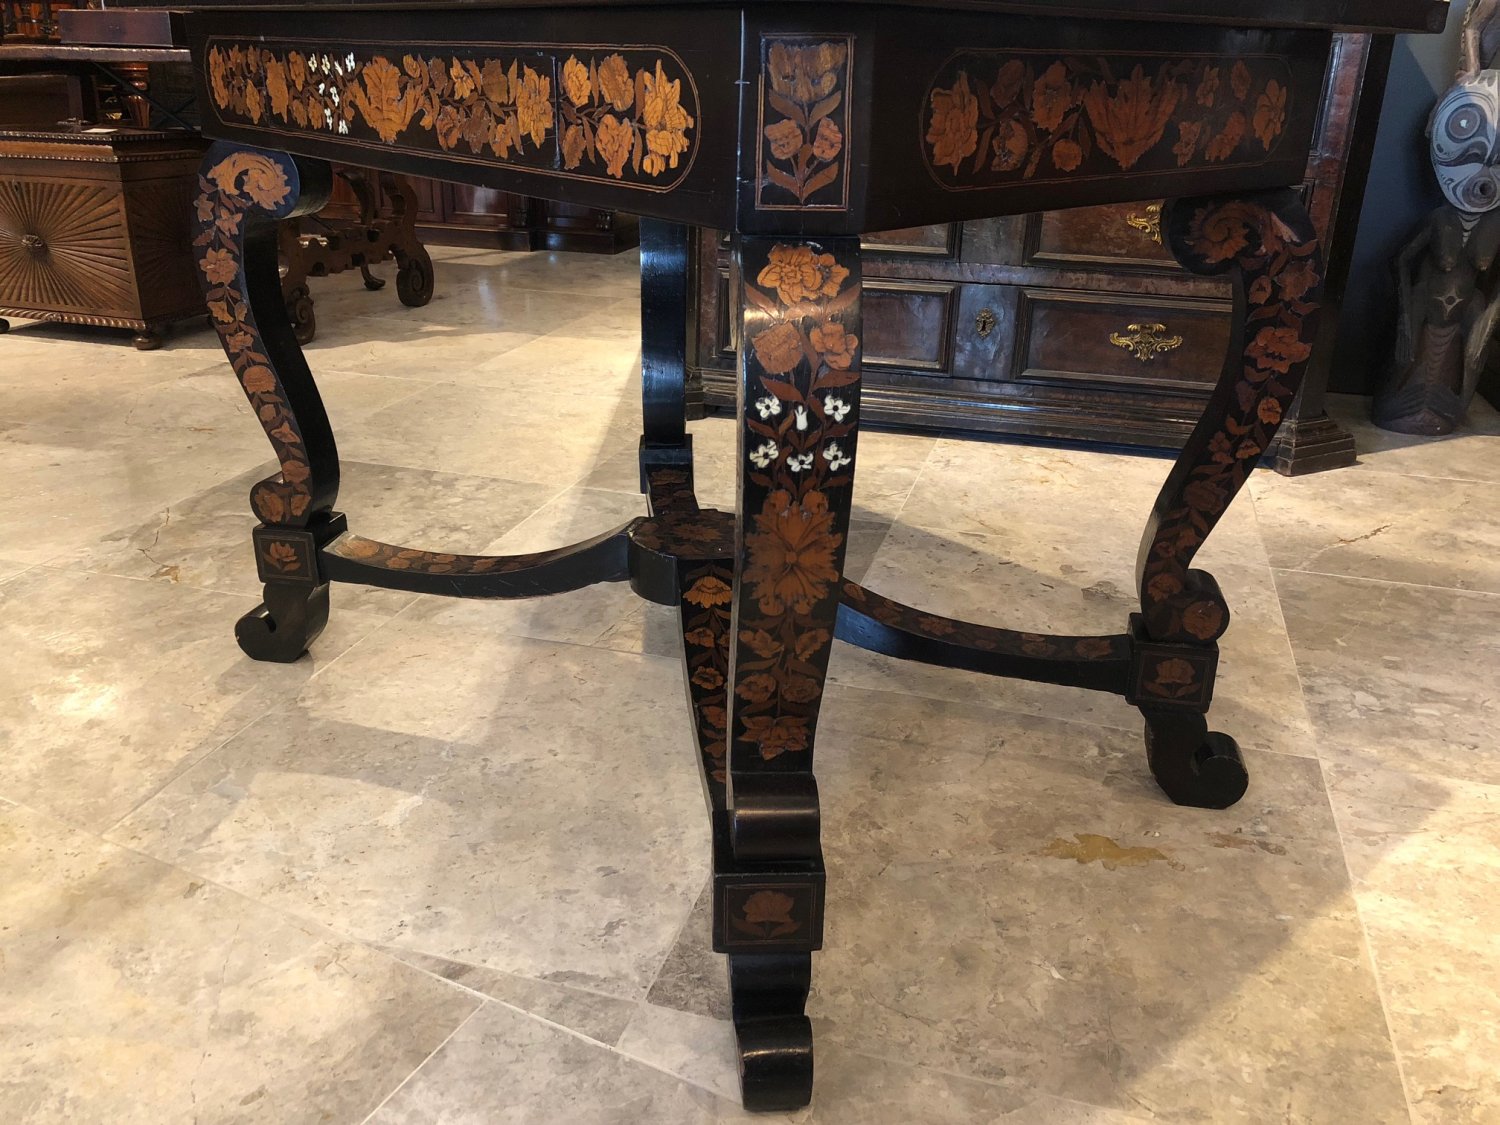 18th Century Dutch Marquetry Table